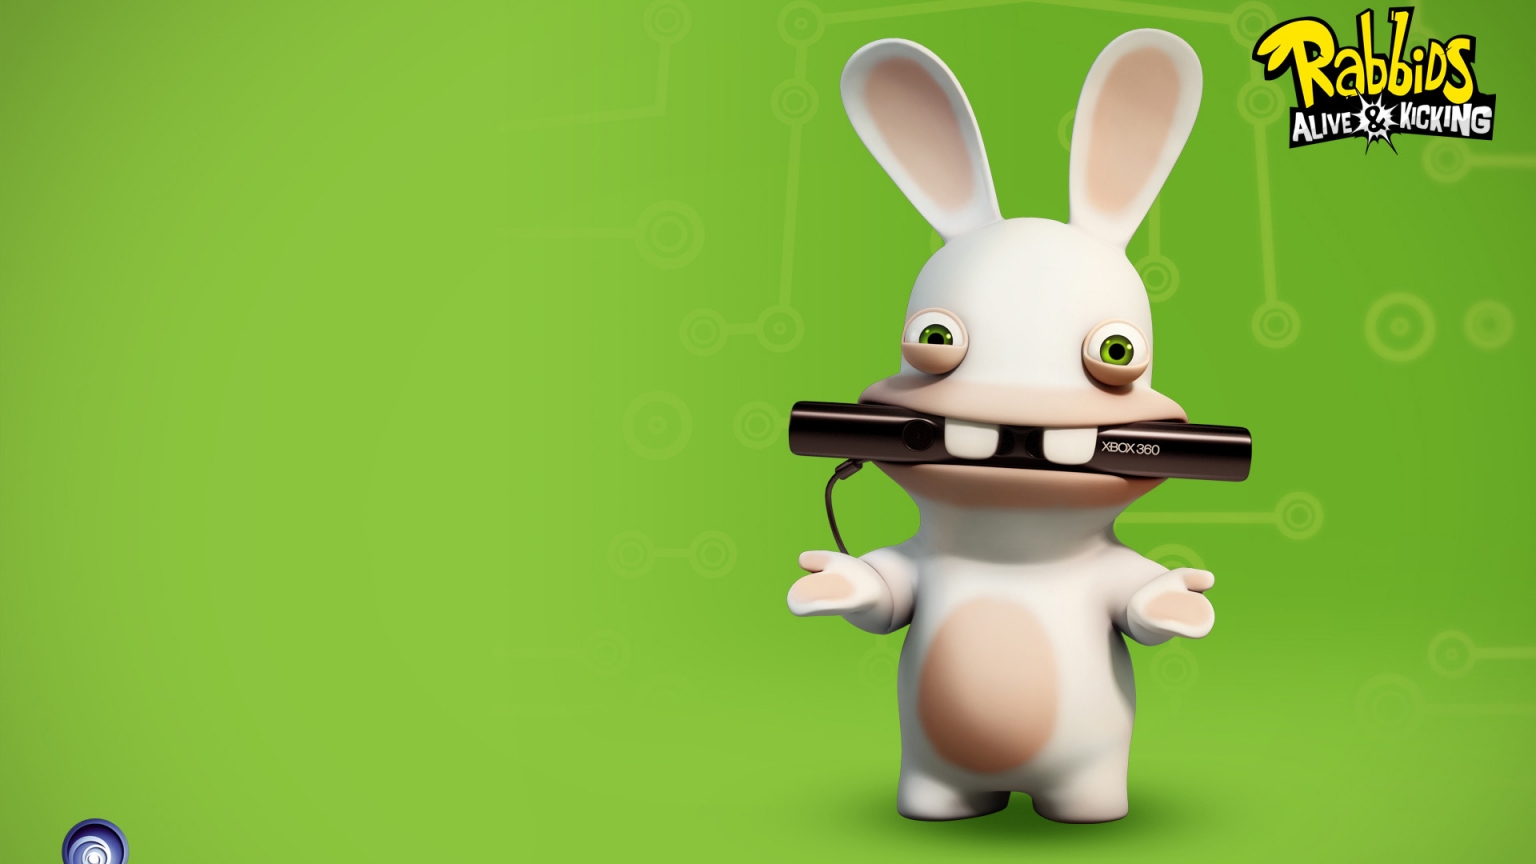 Rabbids Alive and Kicking Game for 1536 x 864 HDTV resolution